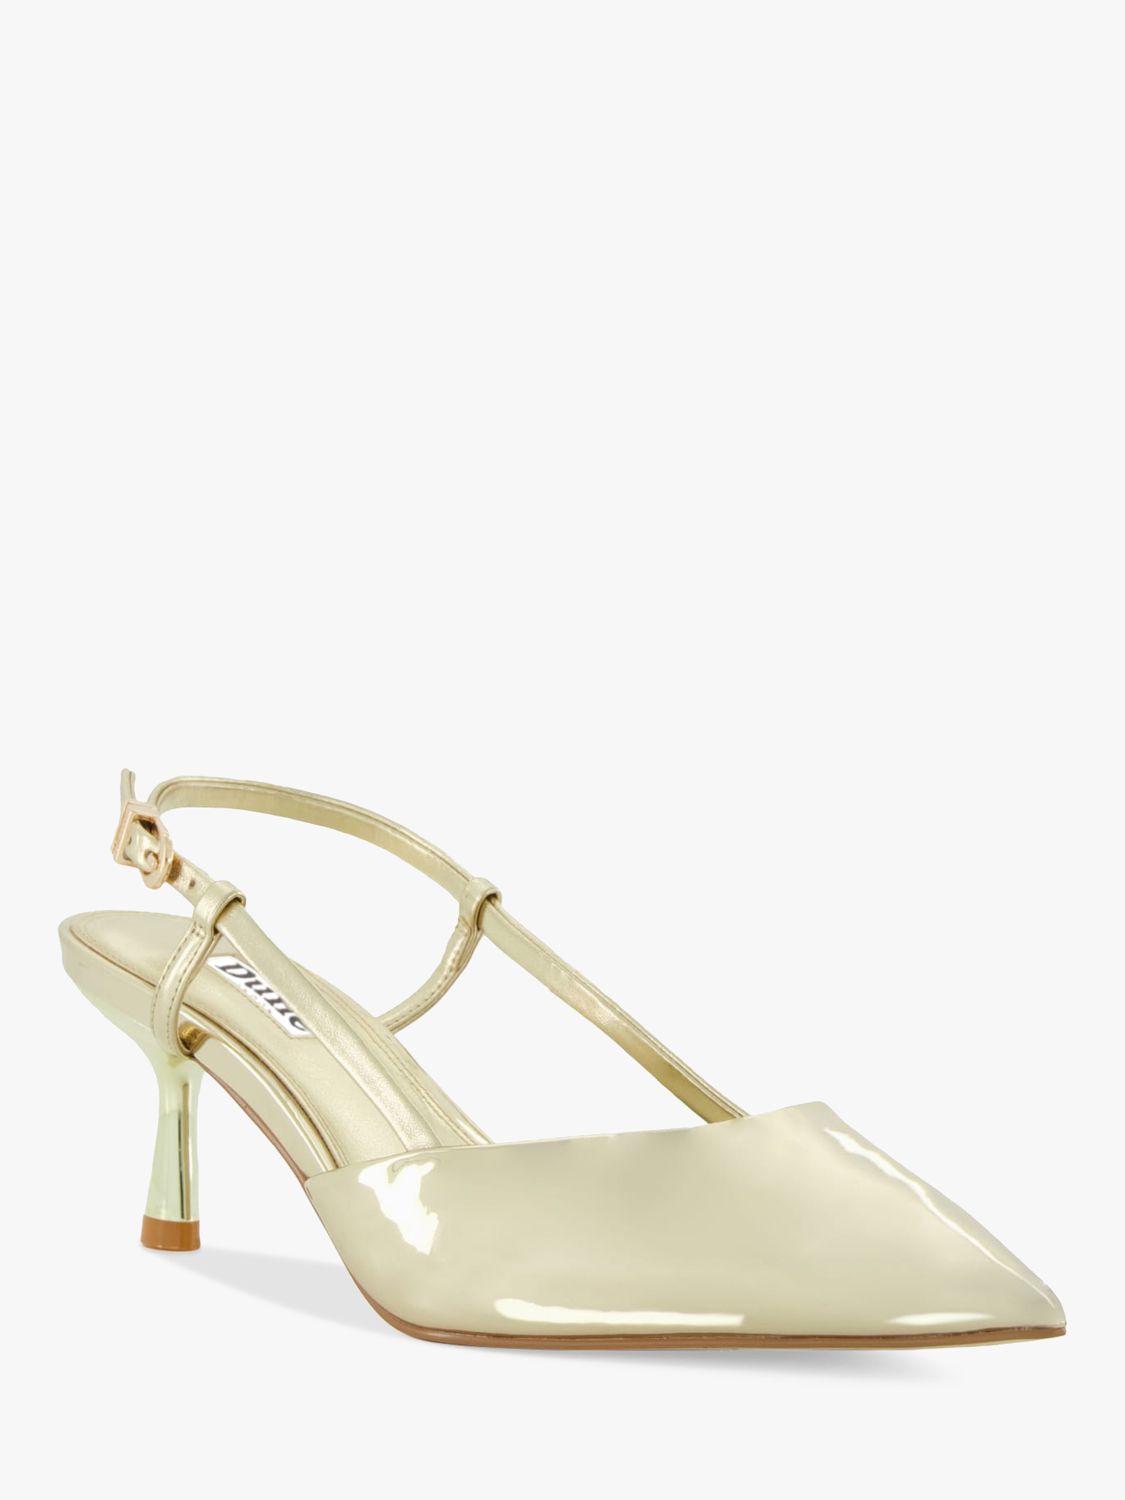 Dune Classify Slingback Pointed Toe Court Shoes, Gold at John Lewis ...